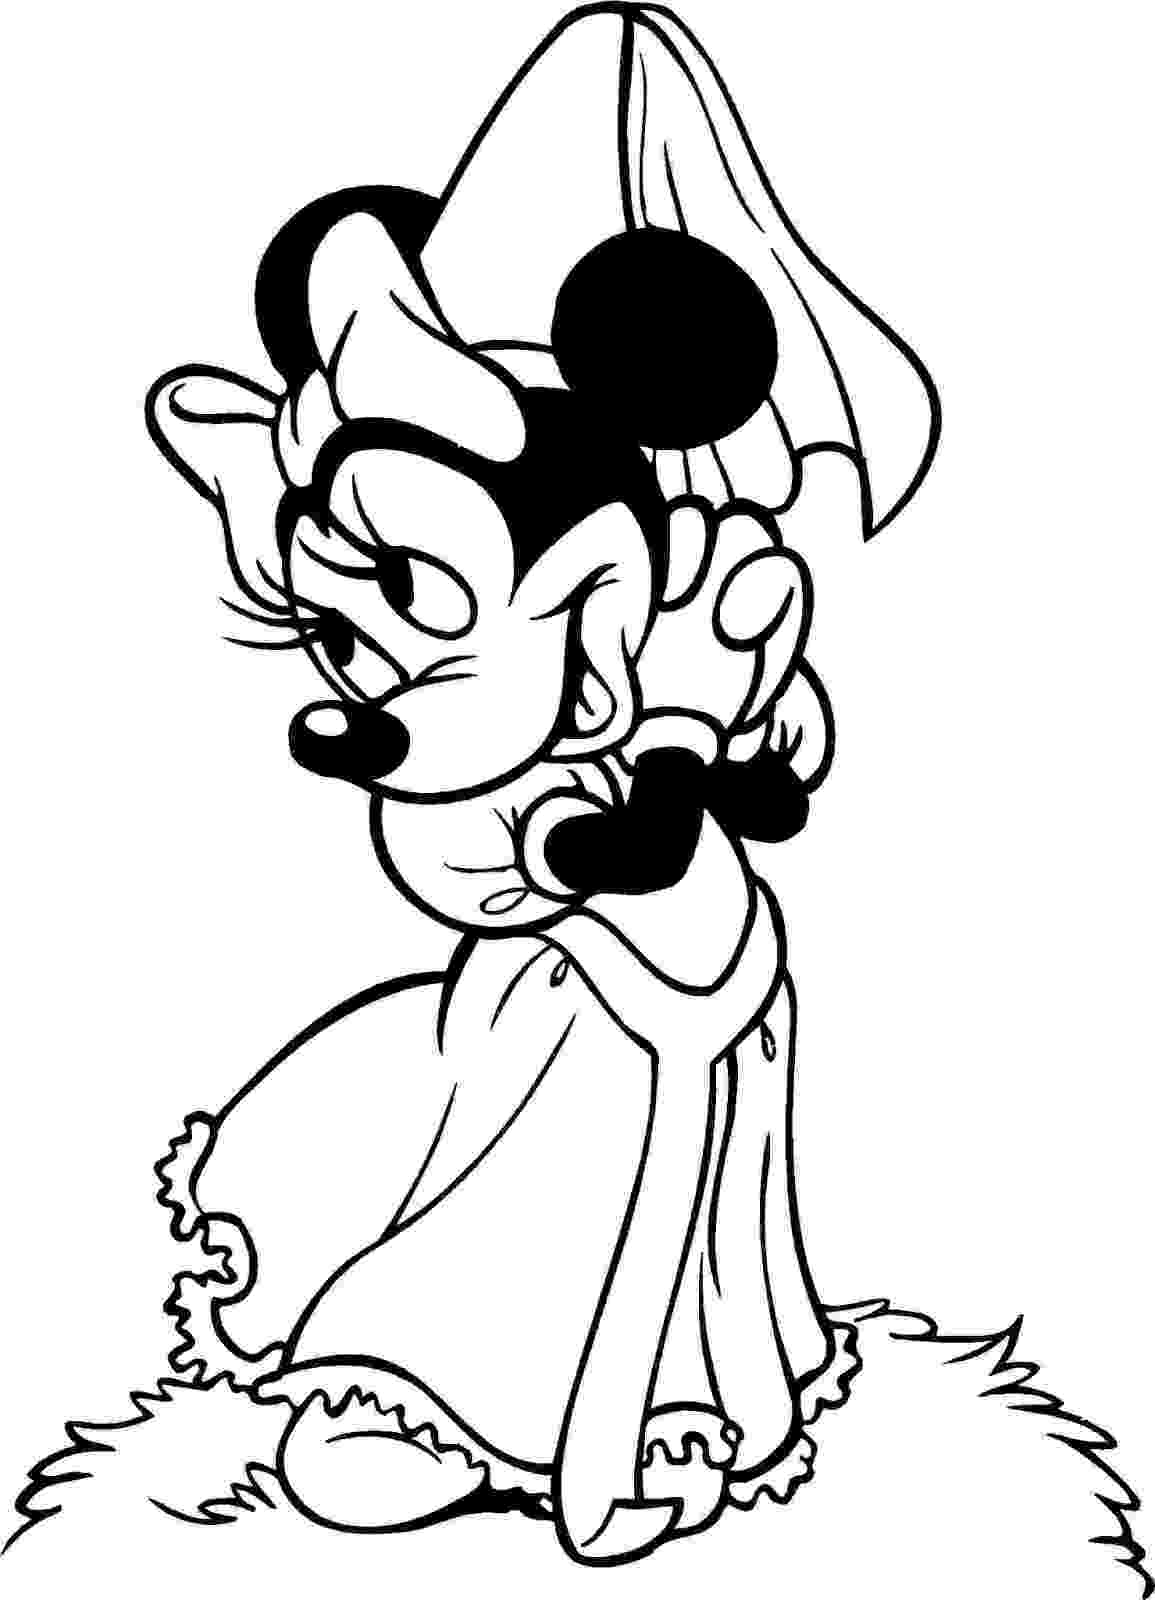 free printable mickey and minnie mouse coloring pages printable minnie mouse coloring pages for kids cool2bkids printable free mickey and mouse minnie pages coloring 